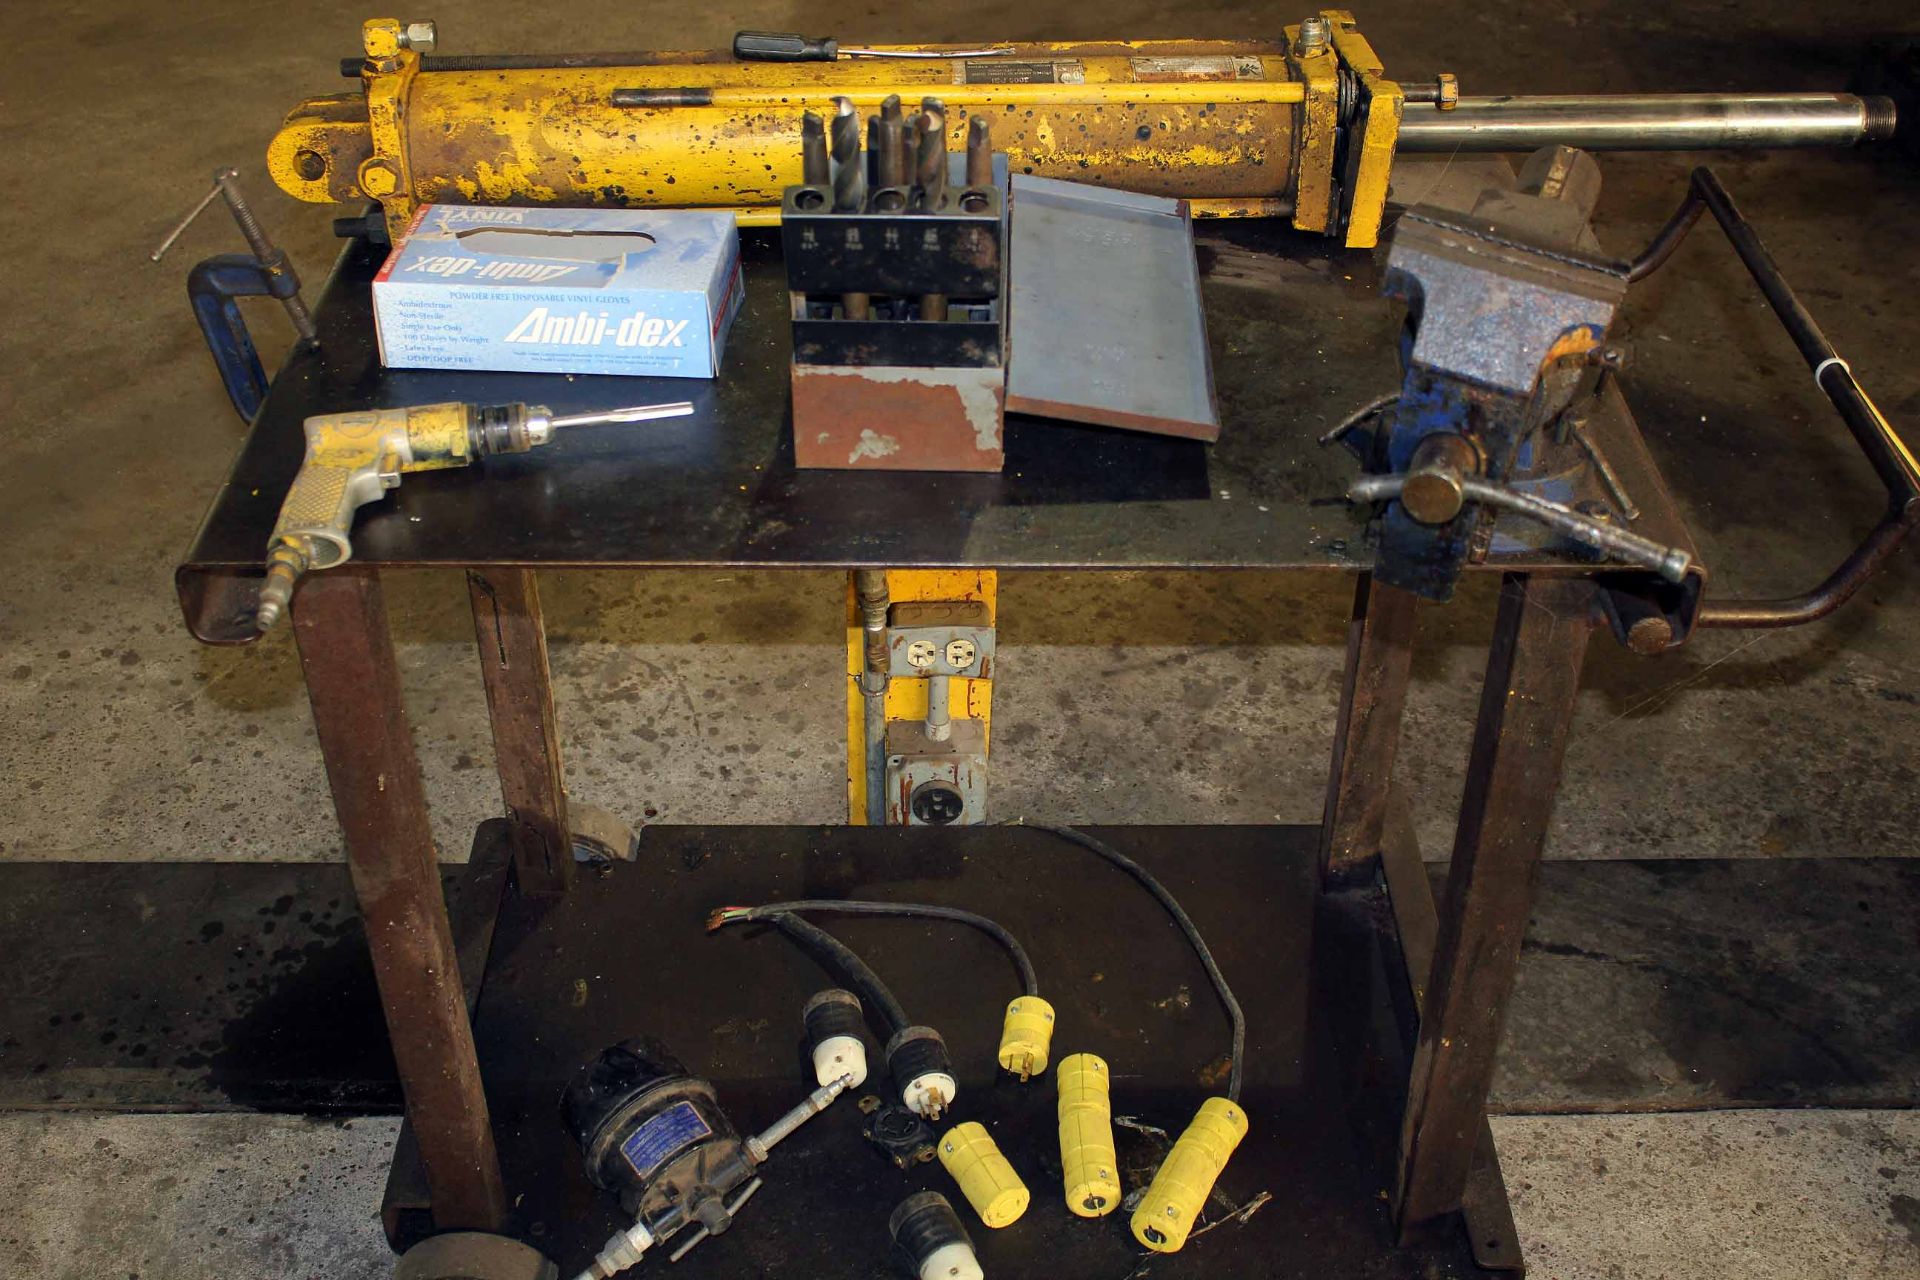 LOT CONSISTING OF: vise, drill bits, hyd. cylinder, etc., on rolling steel cart